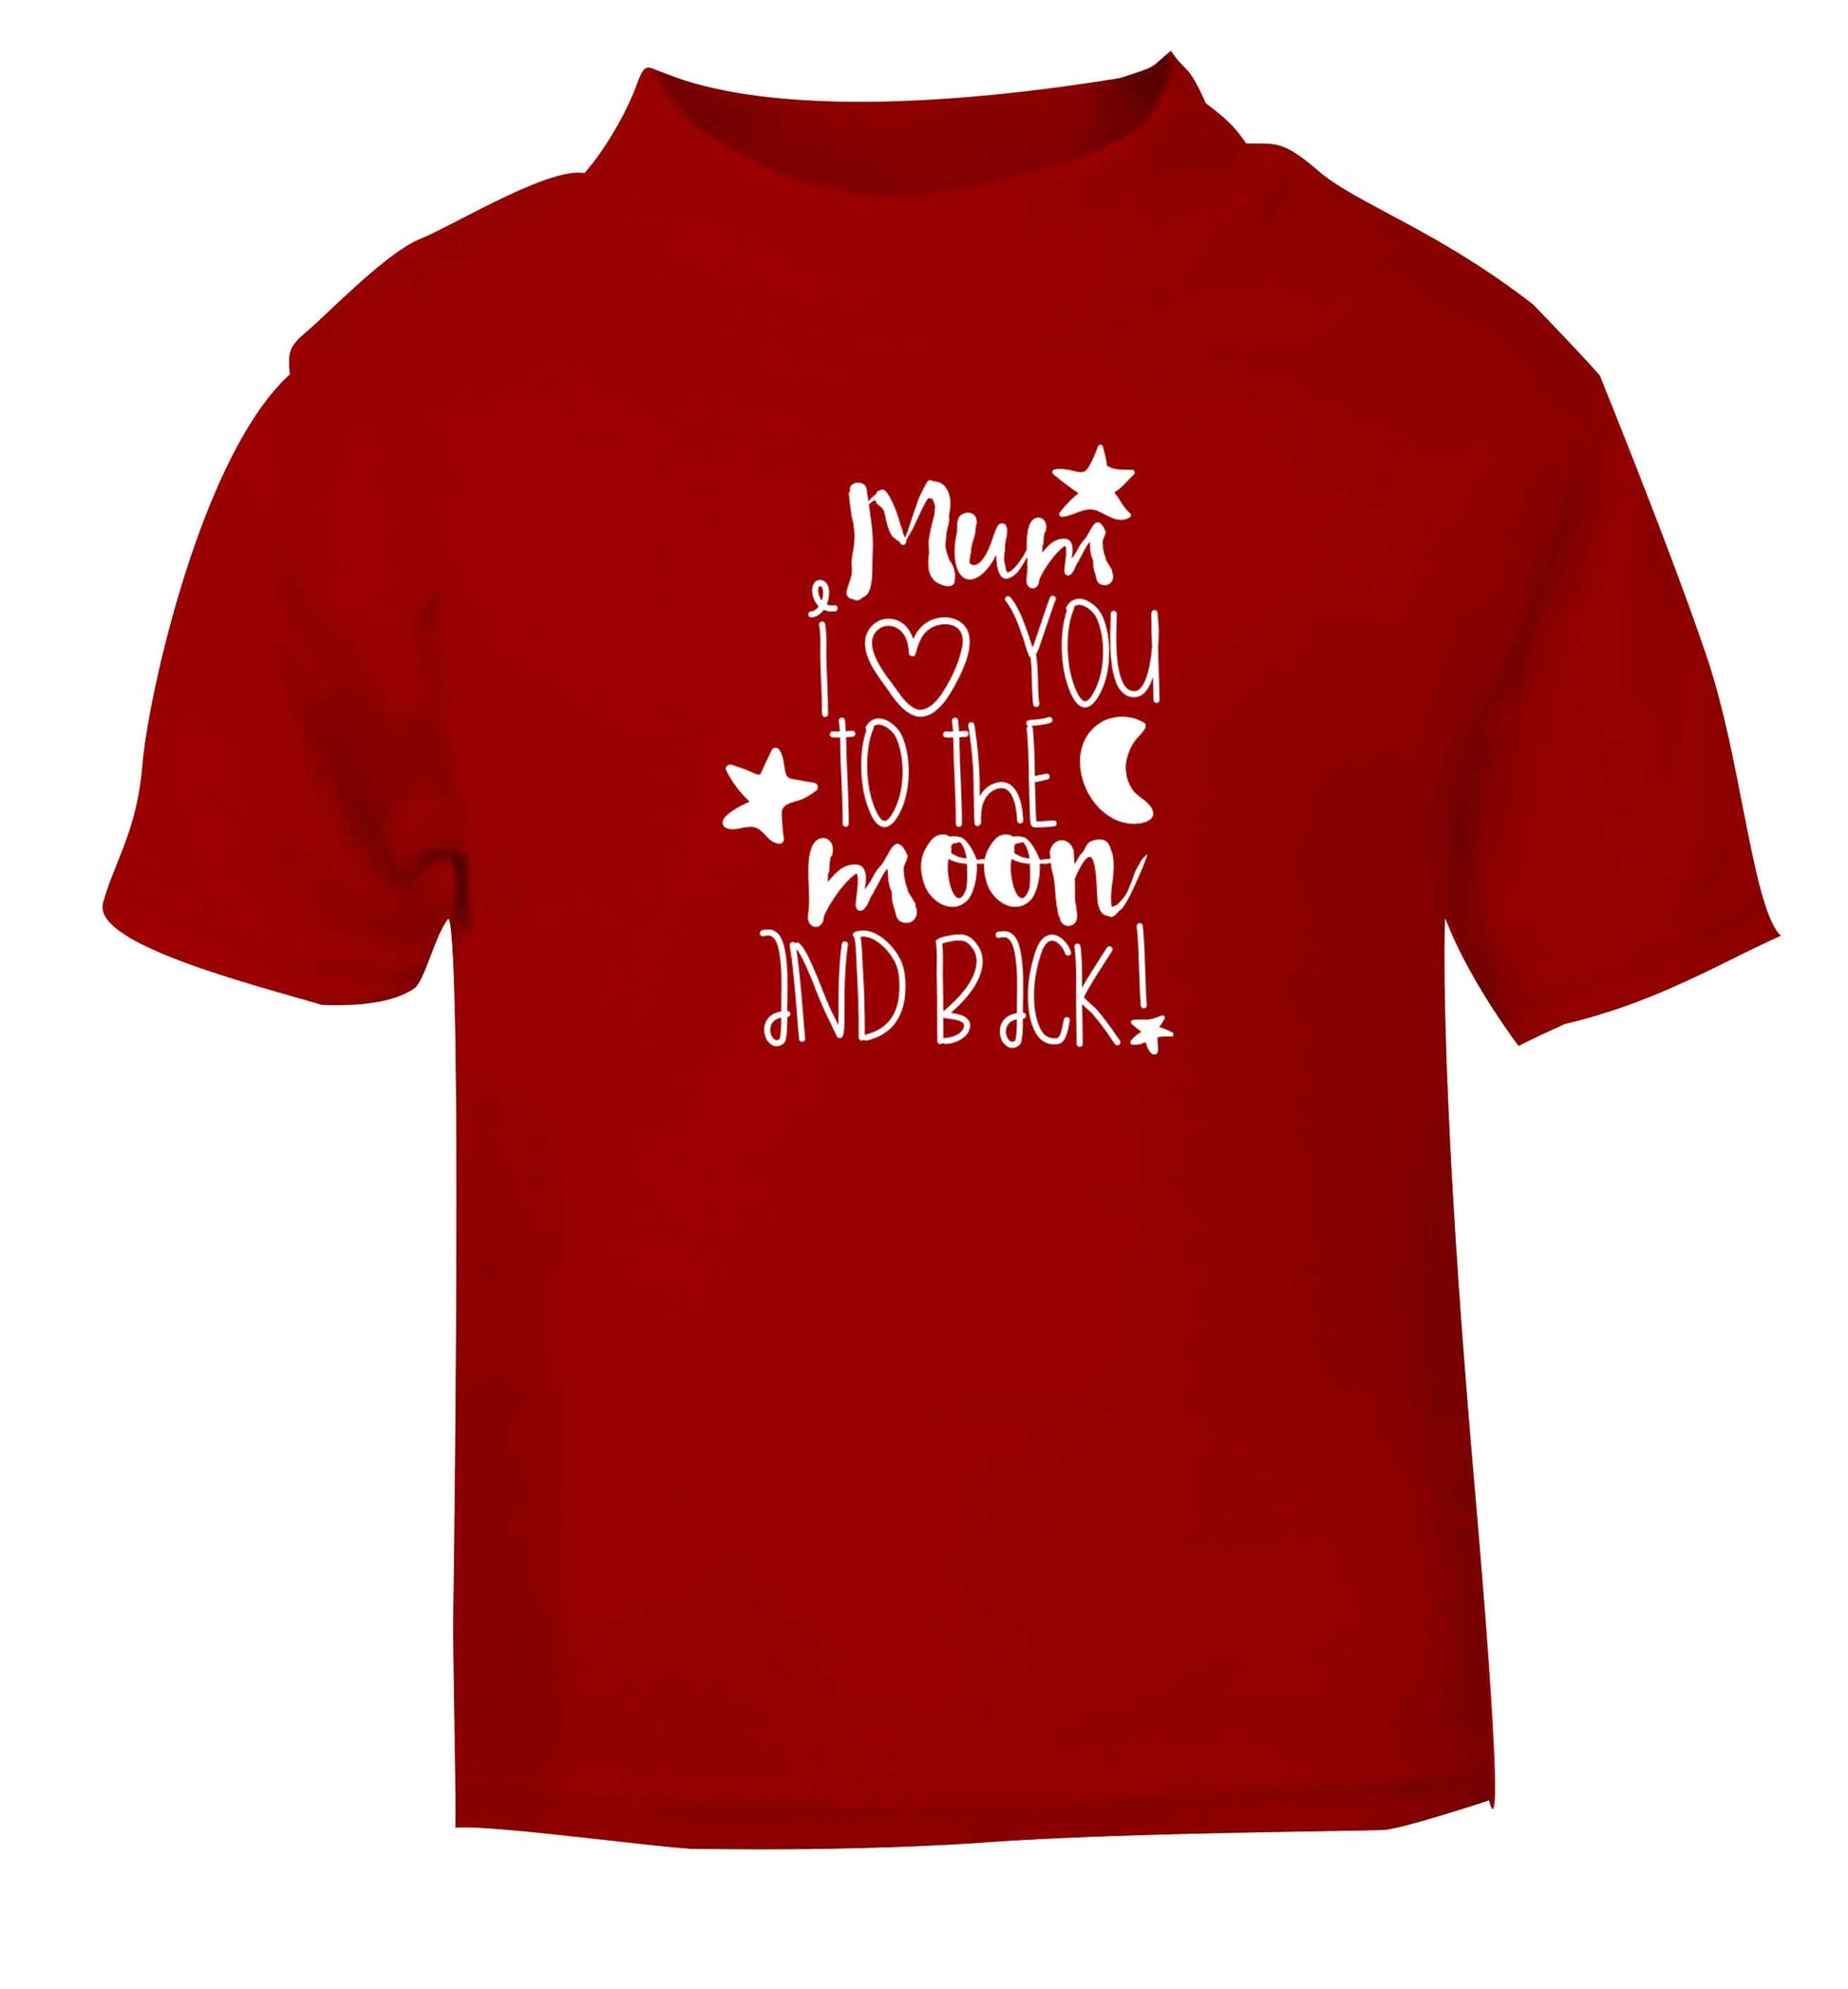 Mum I love you to the moon and back red baby toddler Tshirt 2 Years